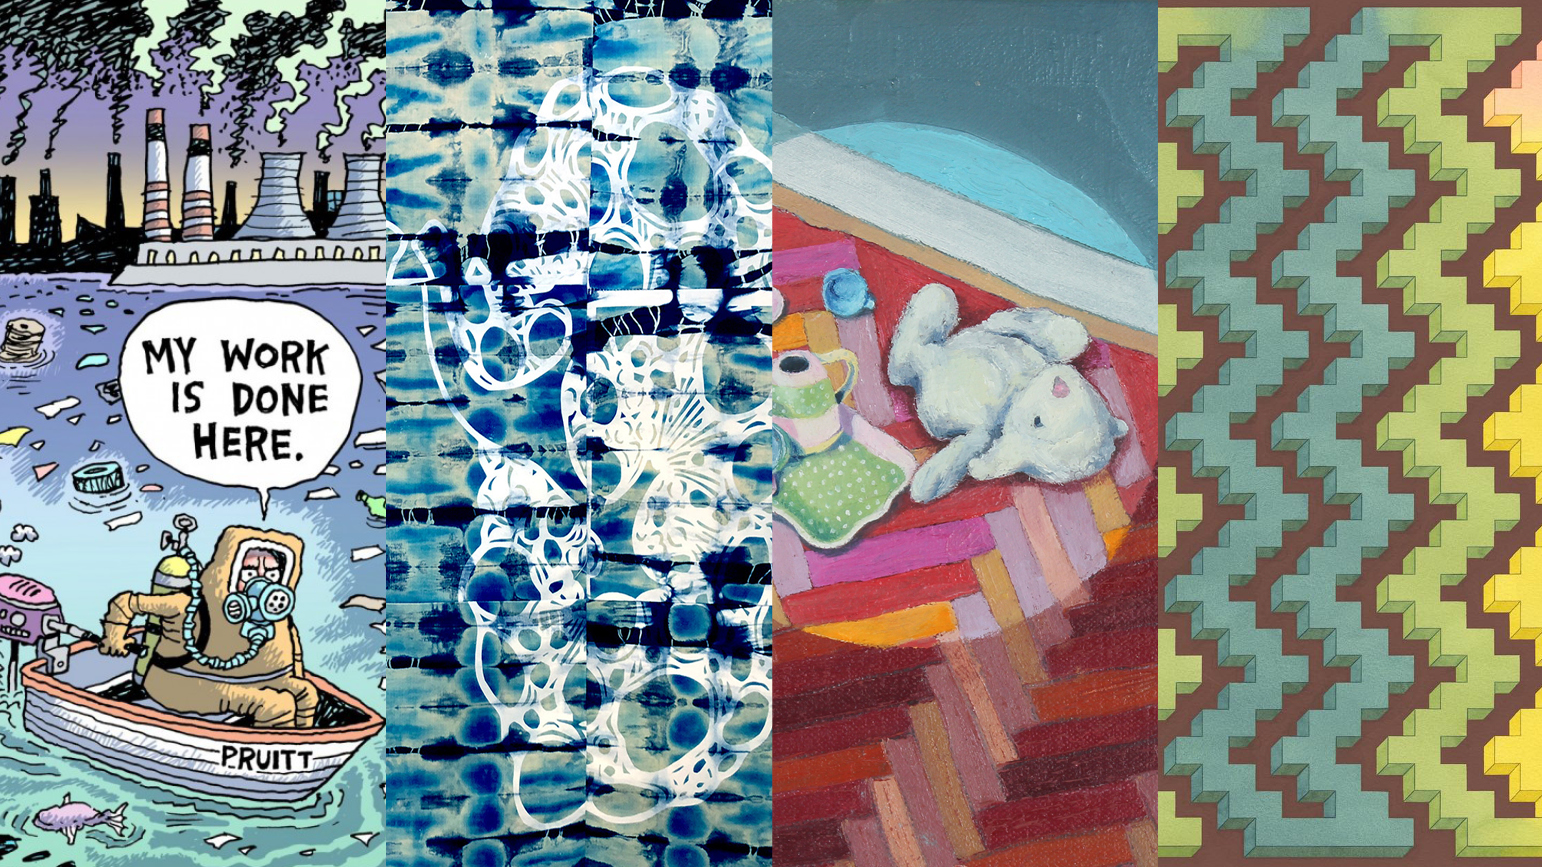 4 images: 1: cartoon with figure in boat marked Pruitt wearing a gas mask with speech bubble saying "My work is done here"; 2: abstract painting in blues and white; 3: painting of stuffed animal and tea set on the floor; 4: abstract geometric work in yellow, blue, green and brown